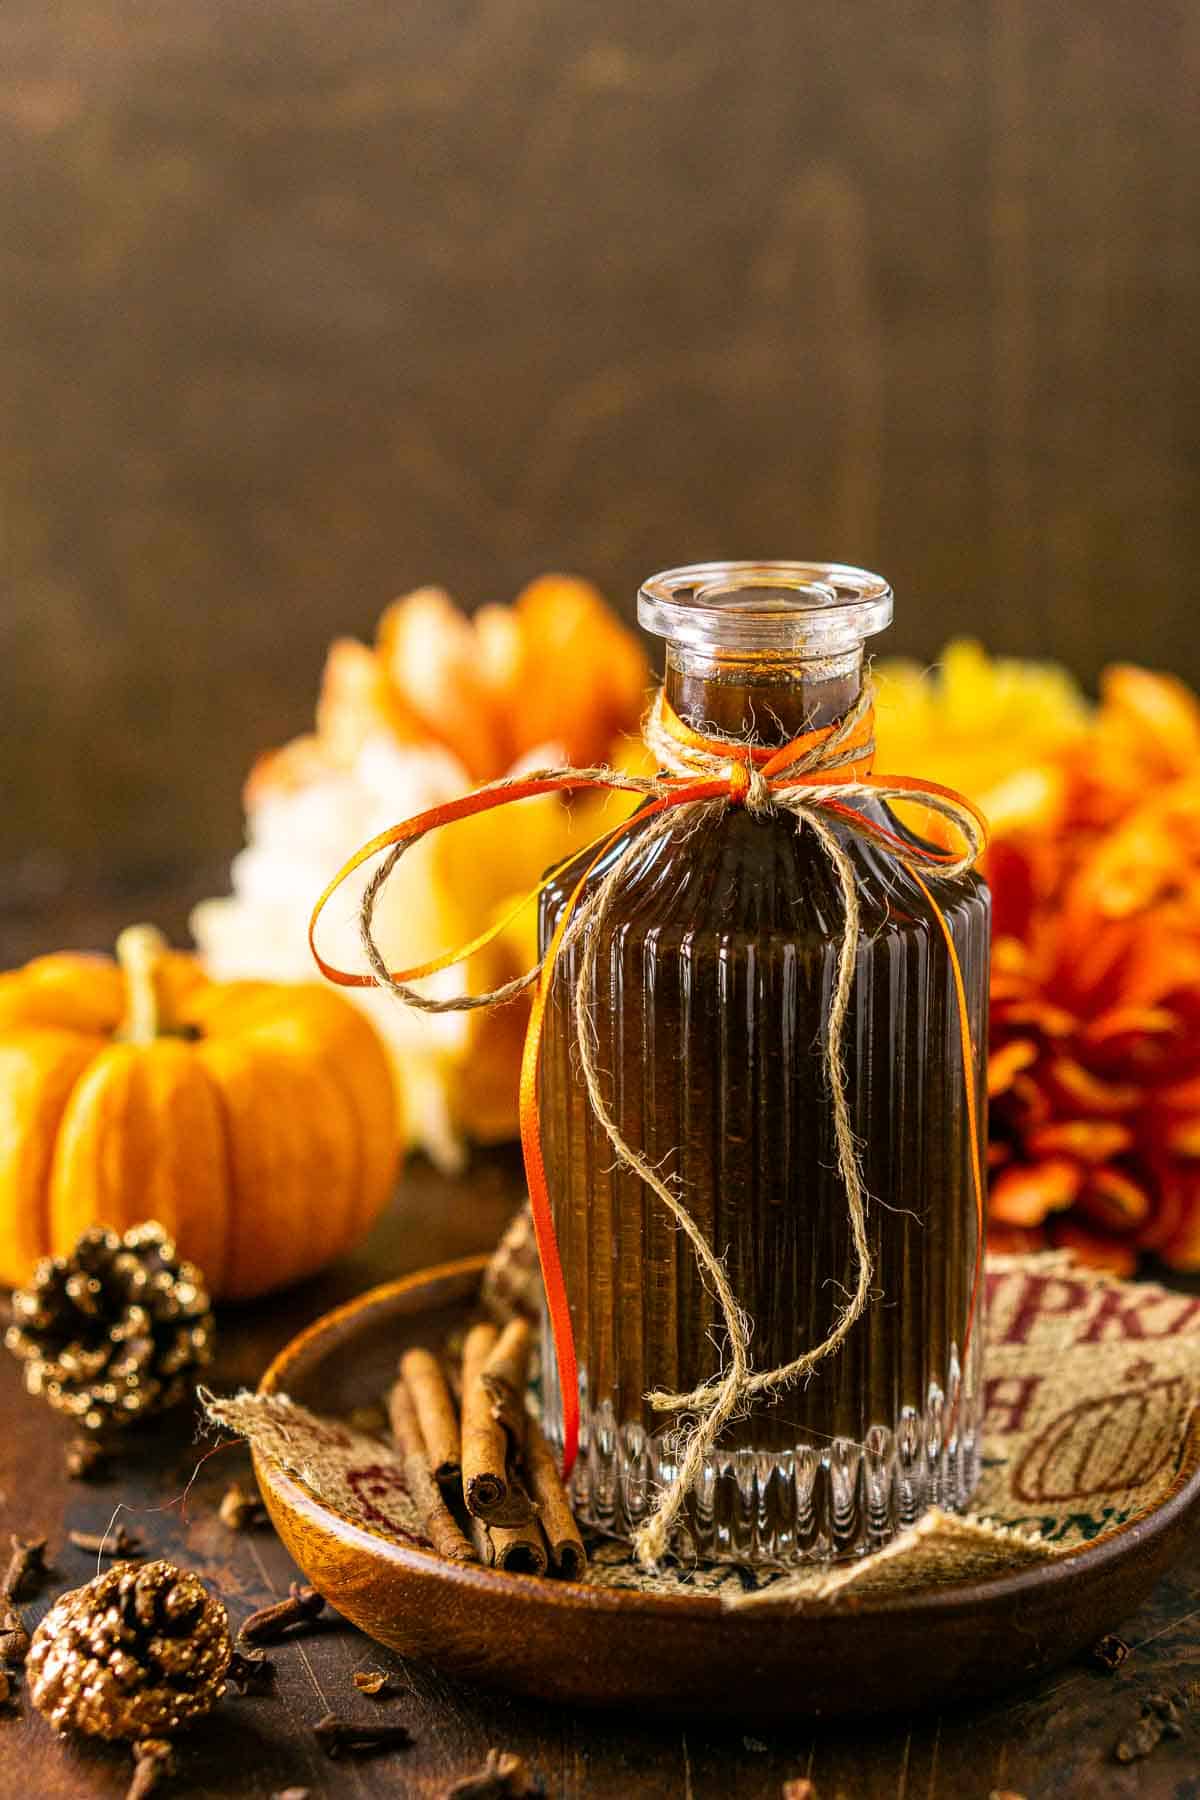 A straight-on view of a bottle of pumpkin spice simple syrup against a brown wooden surface with flowers in the background.